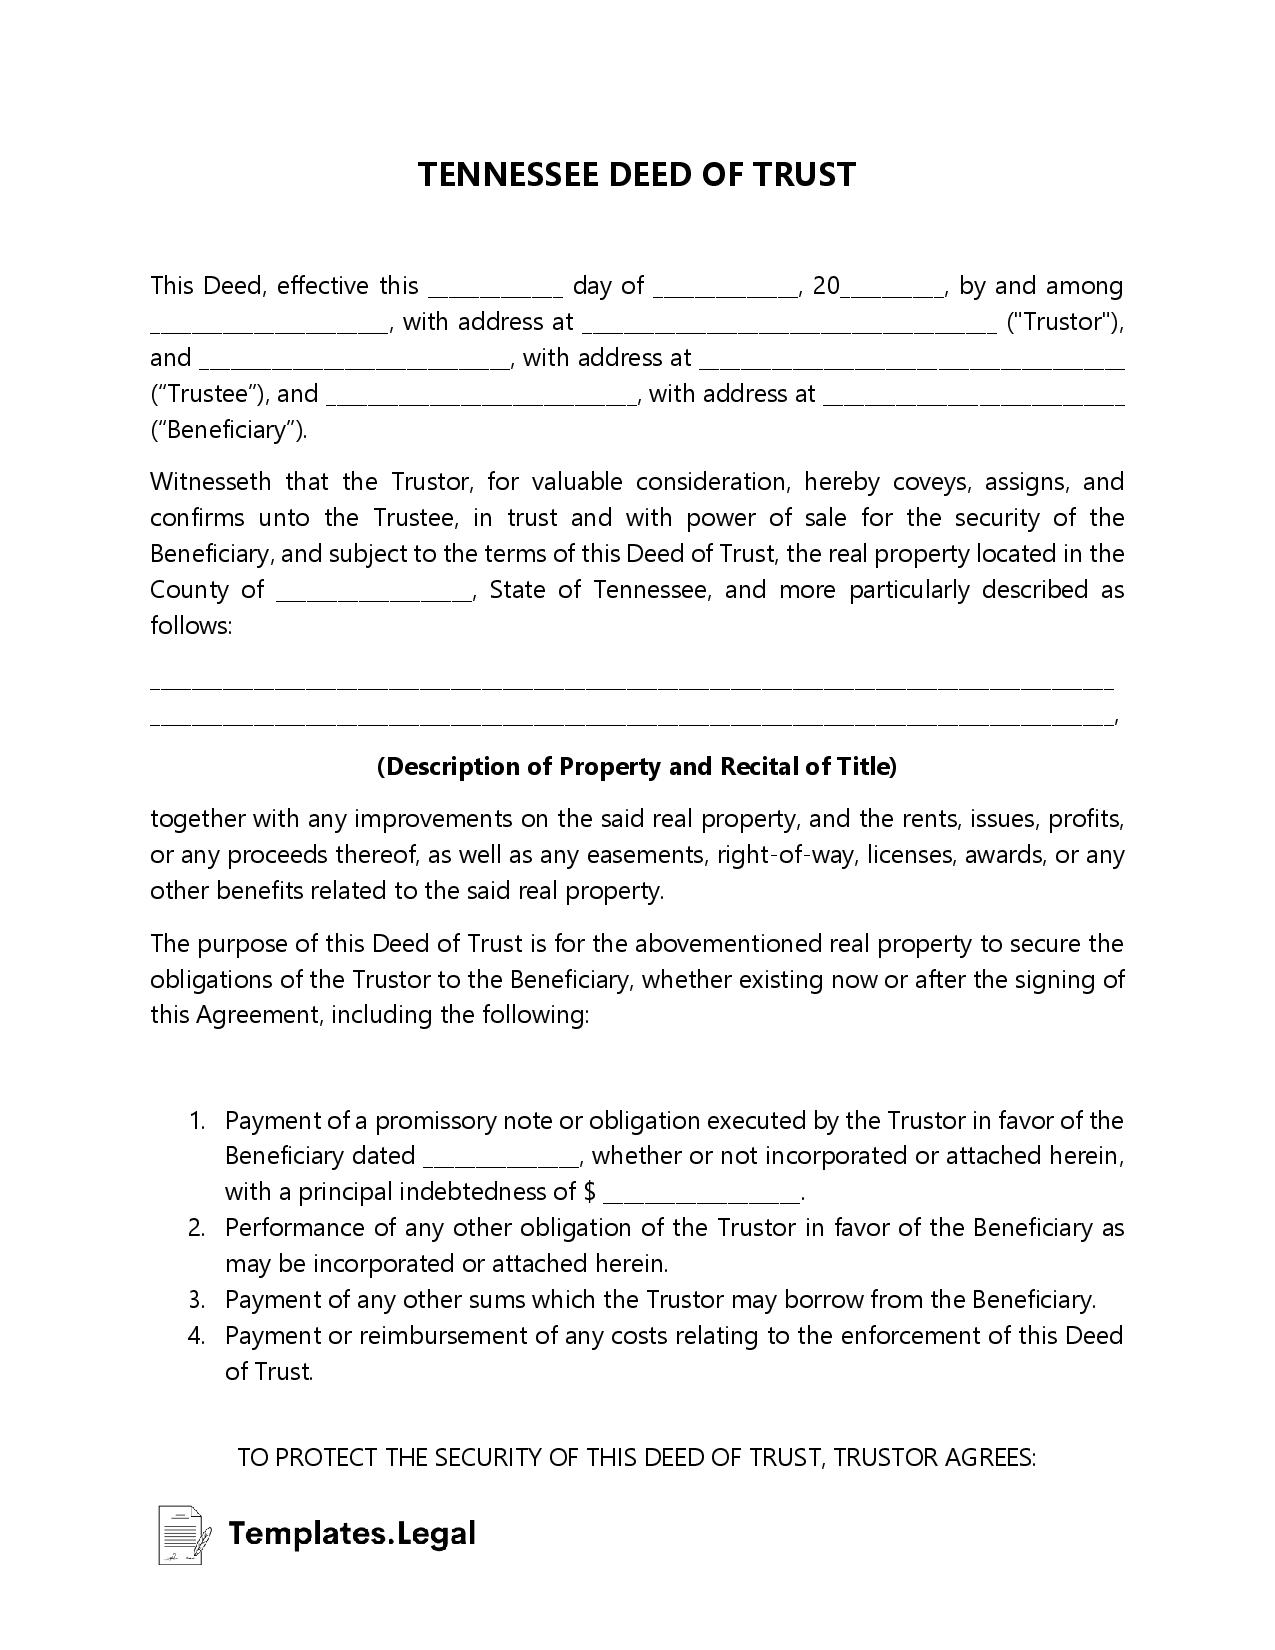 Tennessee Deed of Trust - Templates.Legal